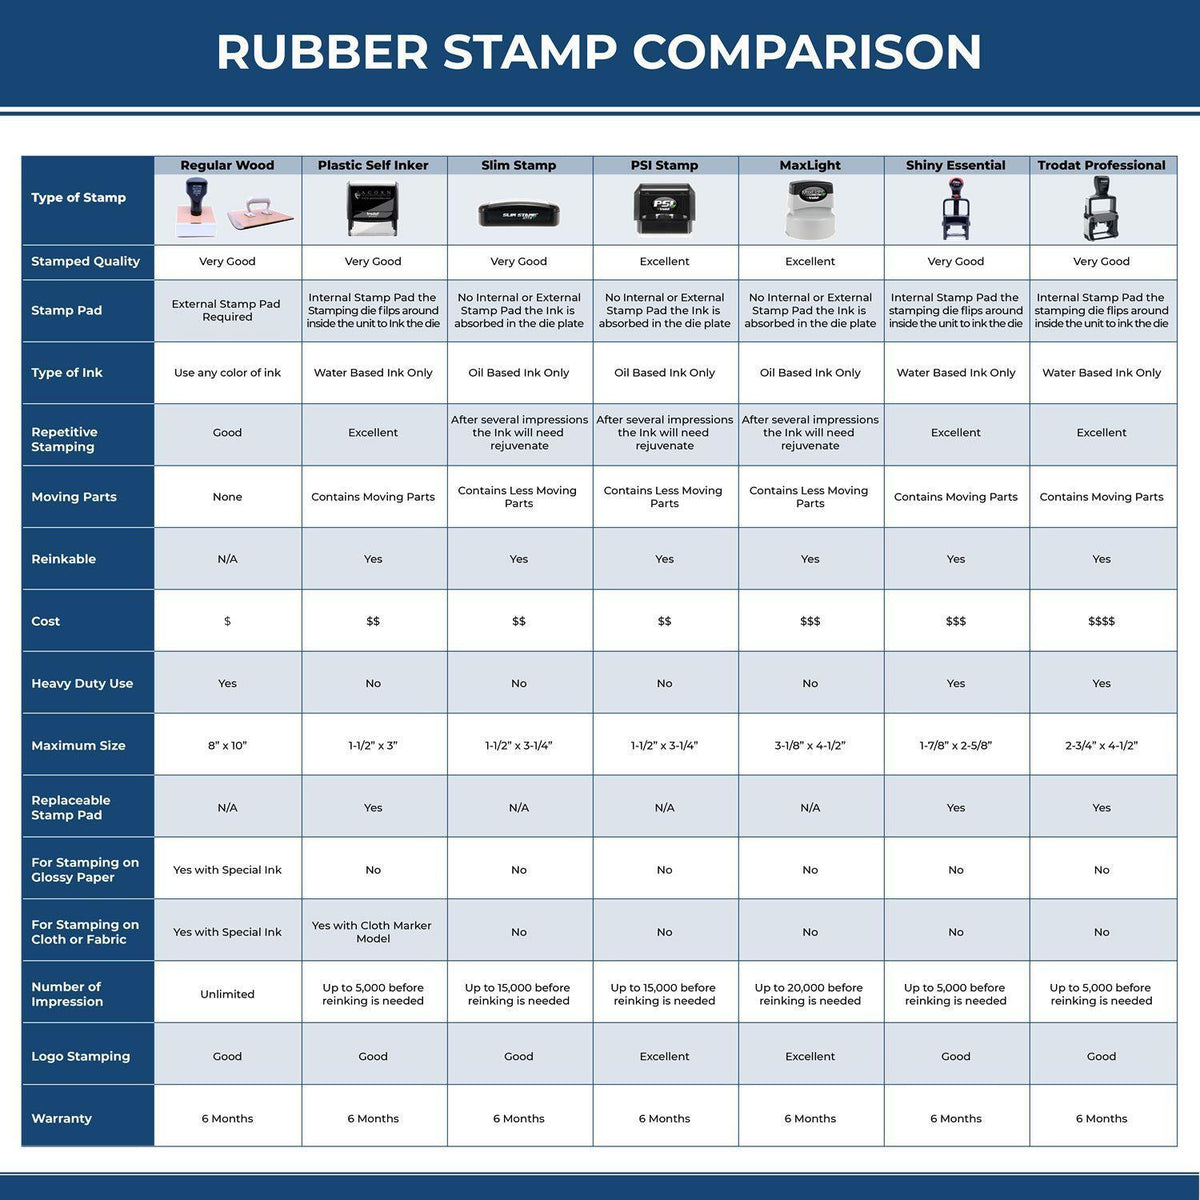 Large Pre Inked Wow Stamp 4697SLIM Rubber Stamp Comparison